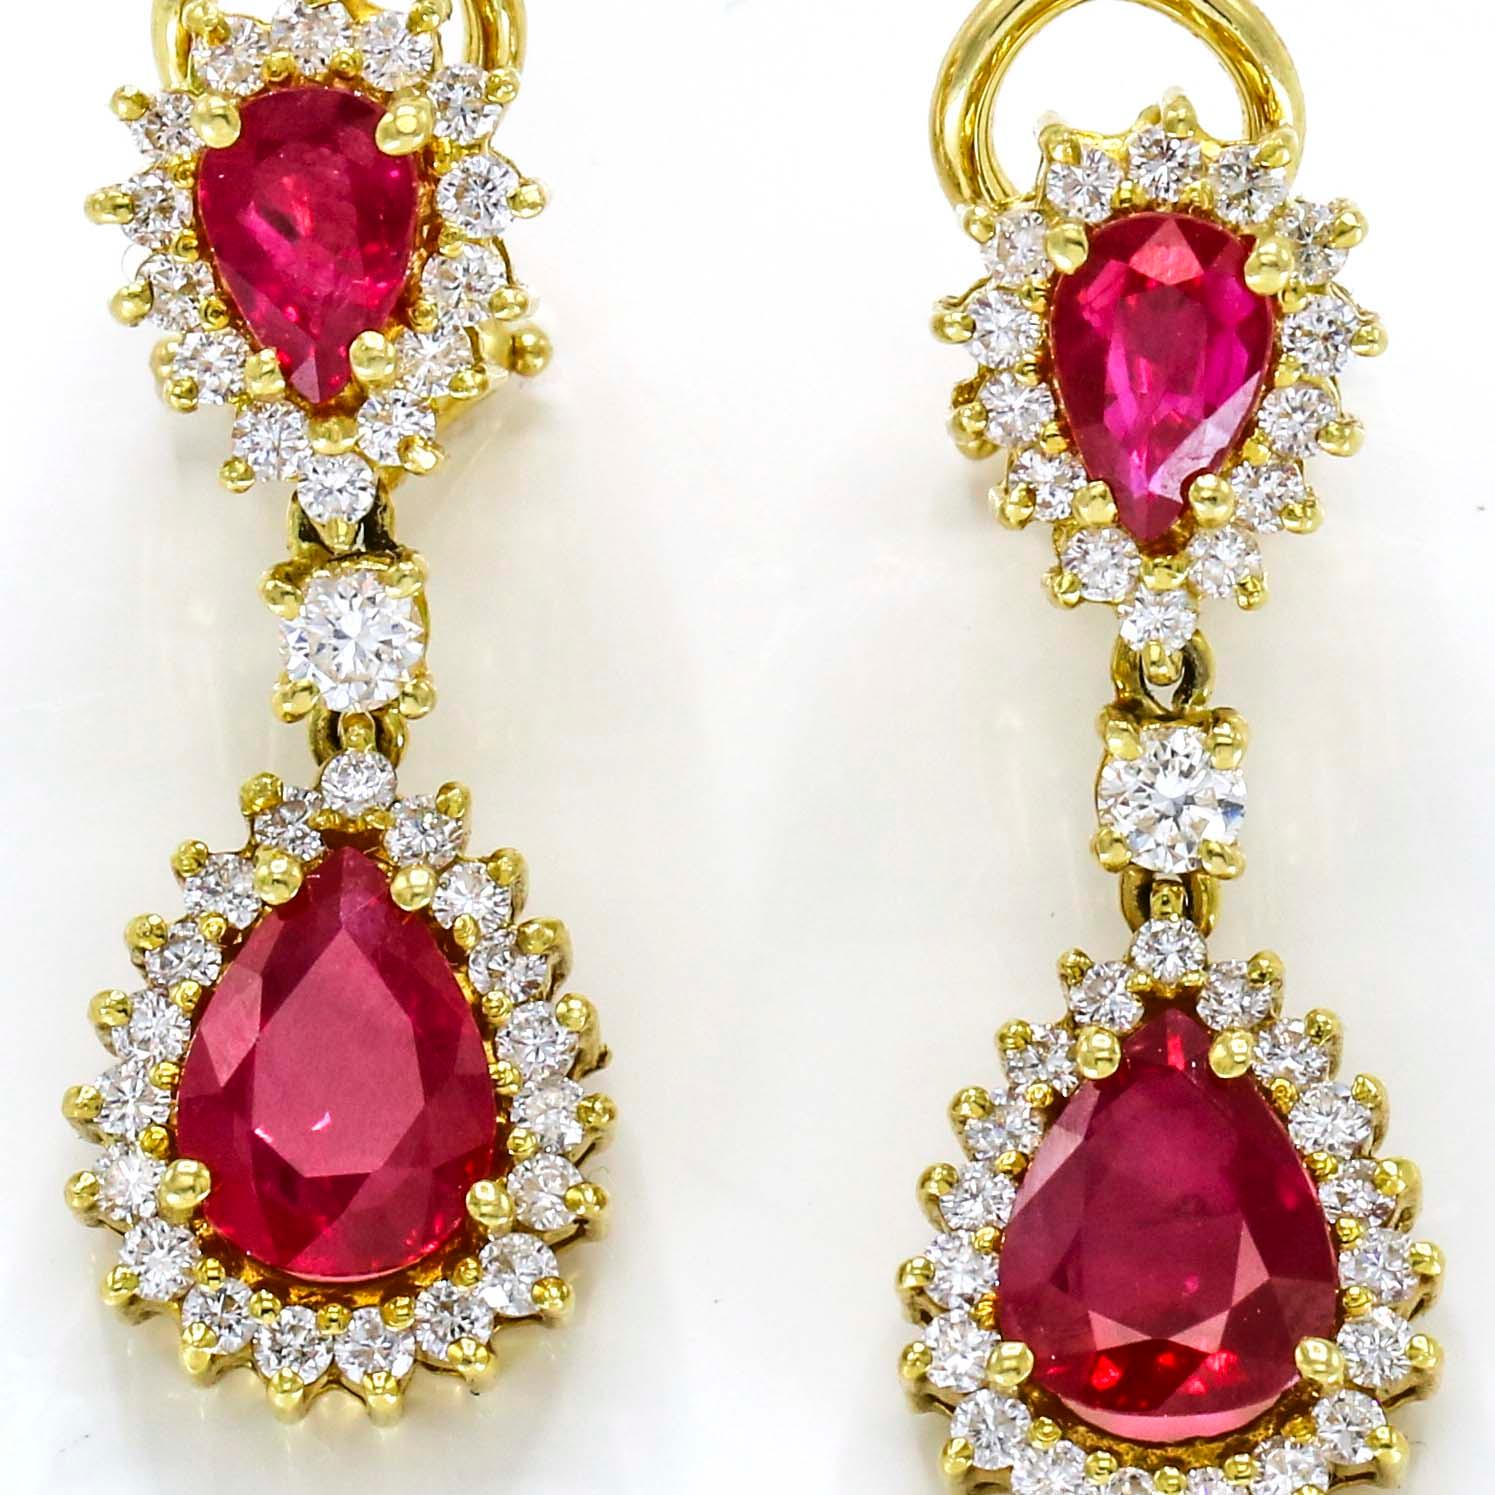 Burma ruby and diamond dangle clip-on earrings in 18-karat yellow gold. 

Length, 28mm
Width, 10mm
Depth, 4.5mm
Weight, 8.5 grams
Diamond Total Carat Weight, .80 carats 

Previously owned, in excellent condition. The earrings come with a gift box.